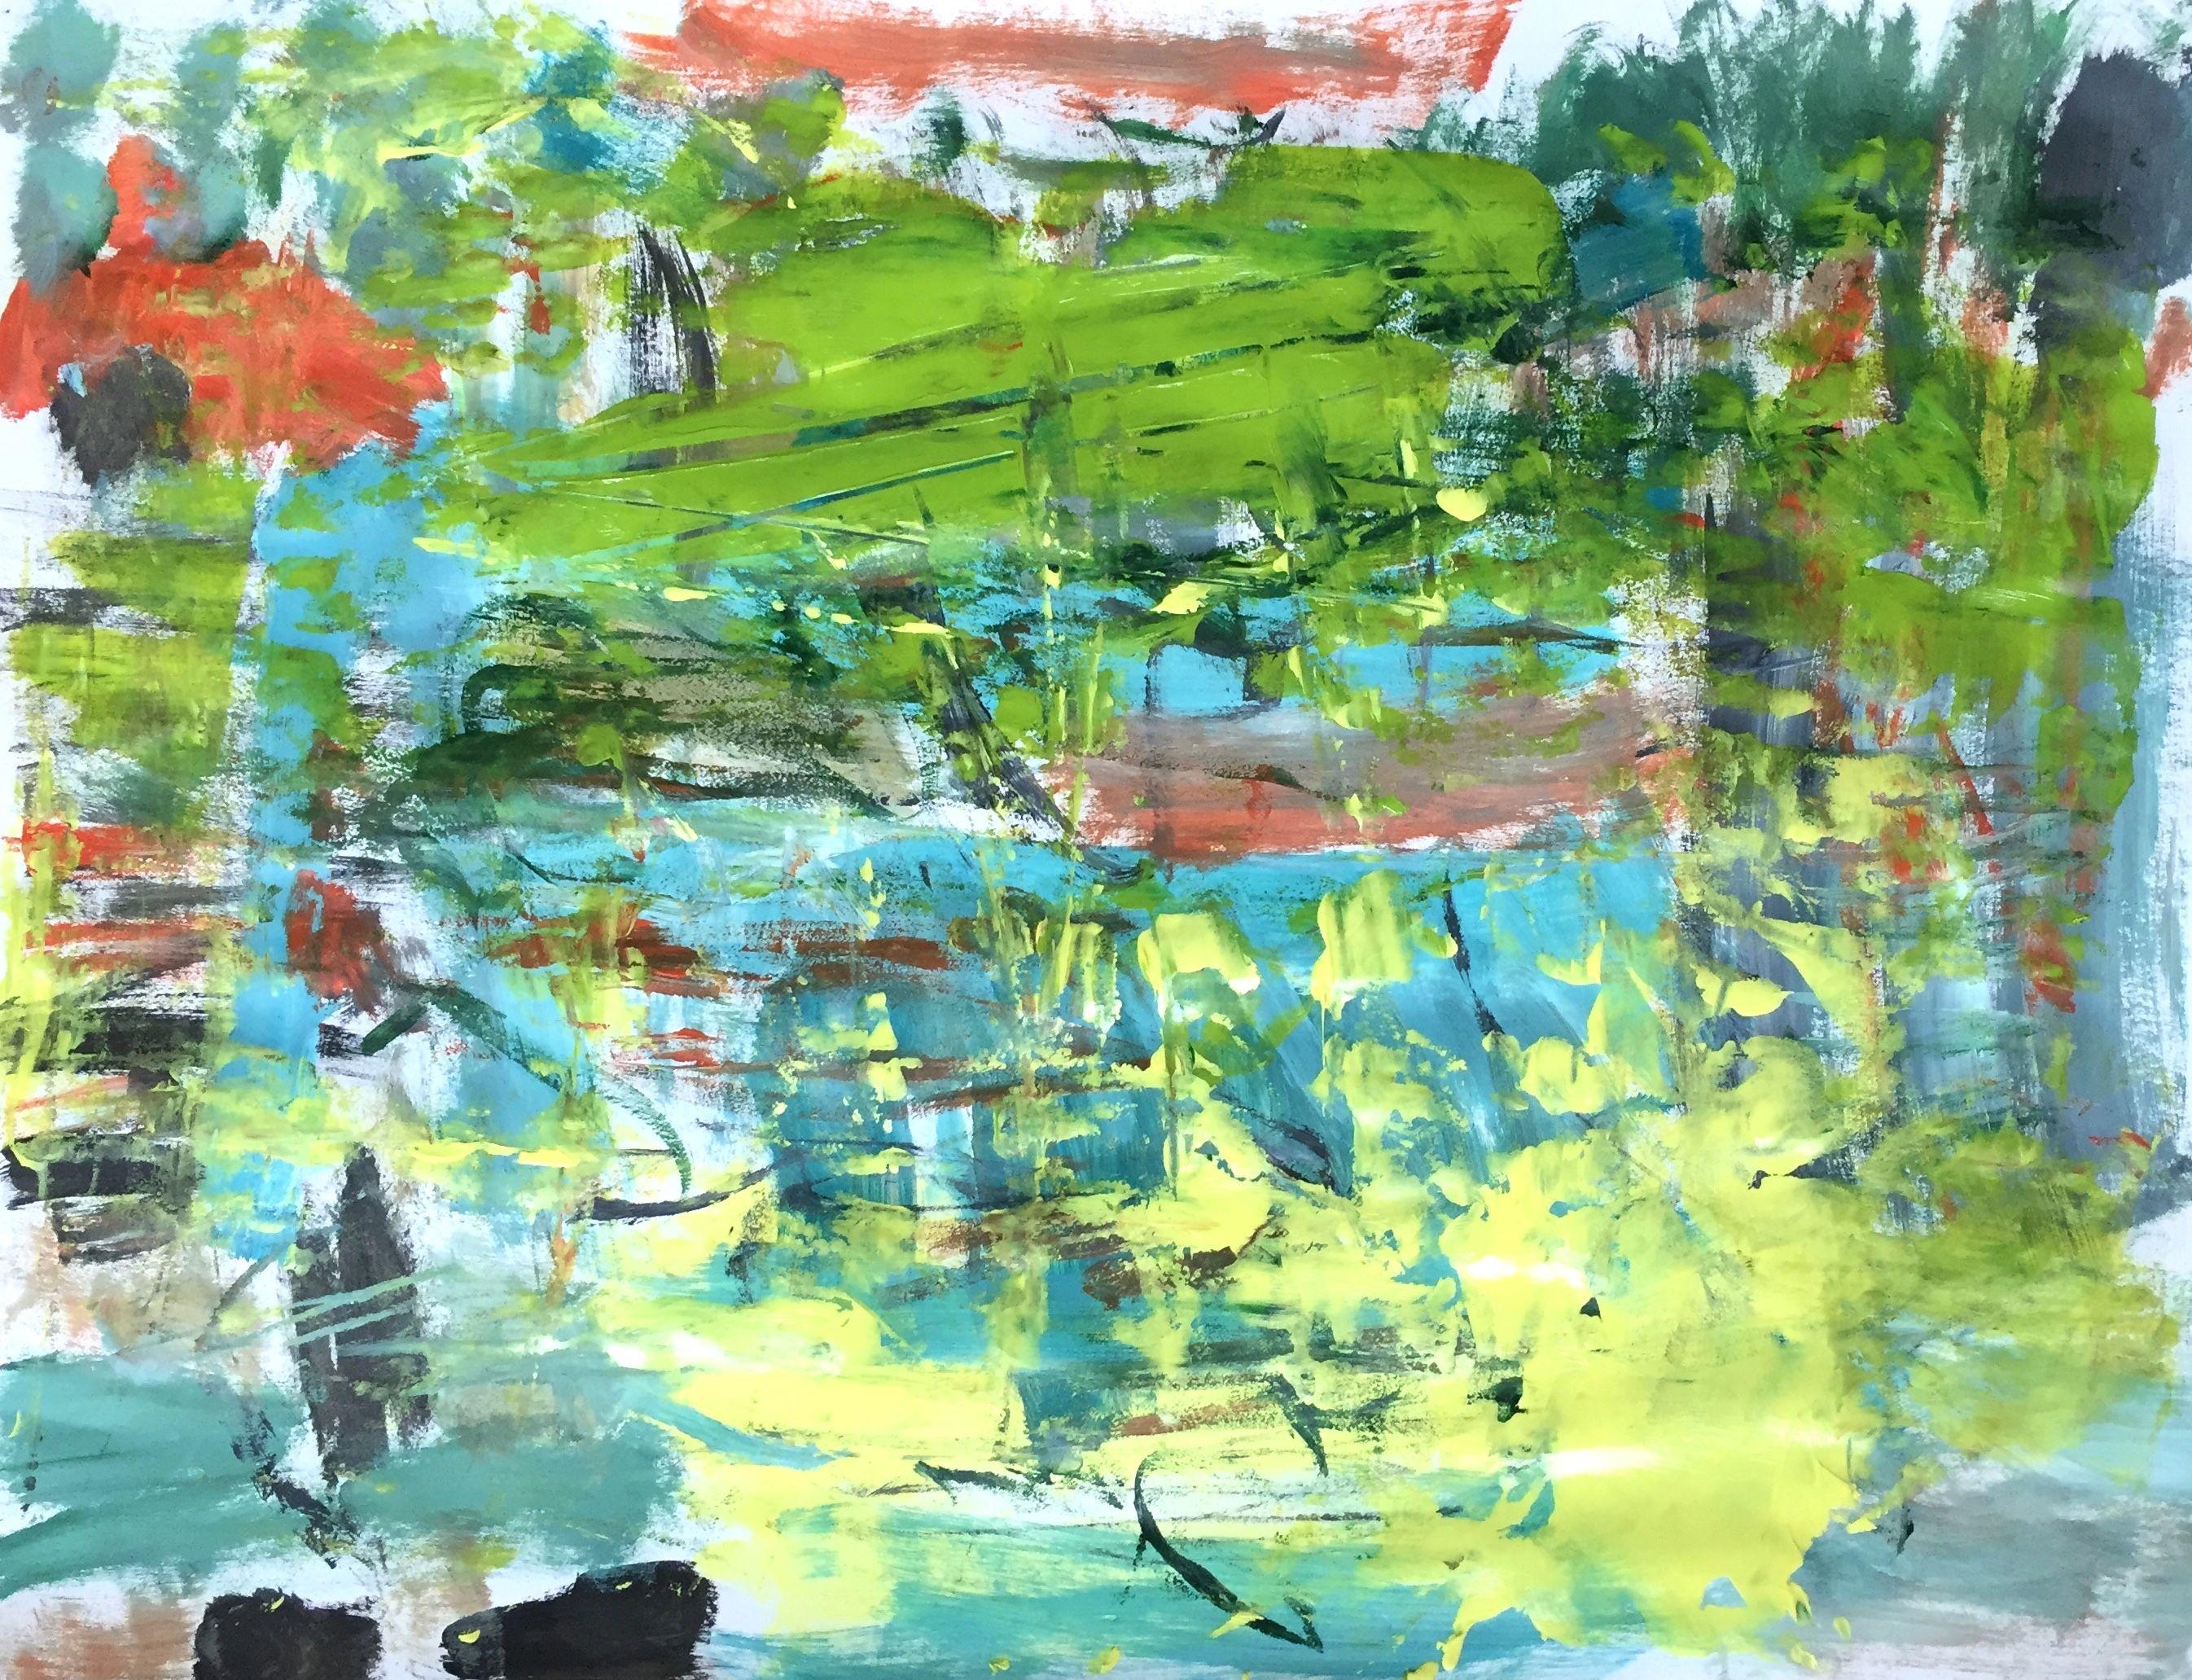 Christel Haag Abstract Painting - GrÃ¼n ist die Hoffnung, Painting, Acrylic on Paper